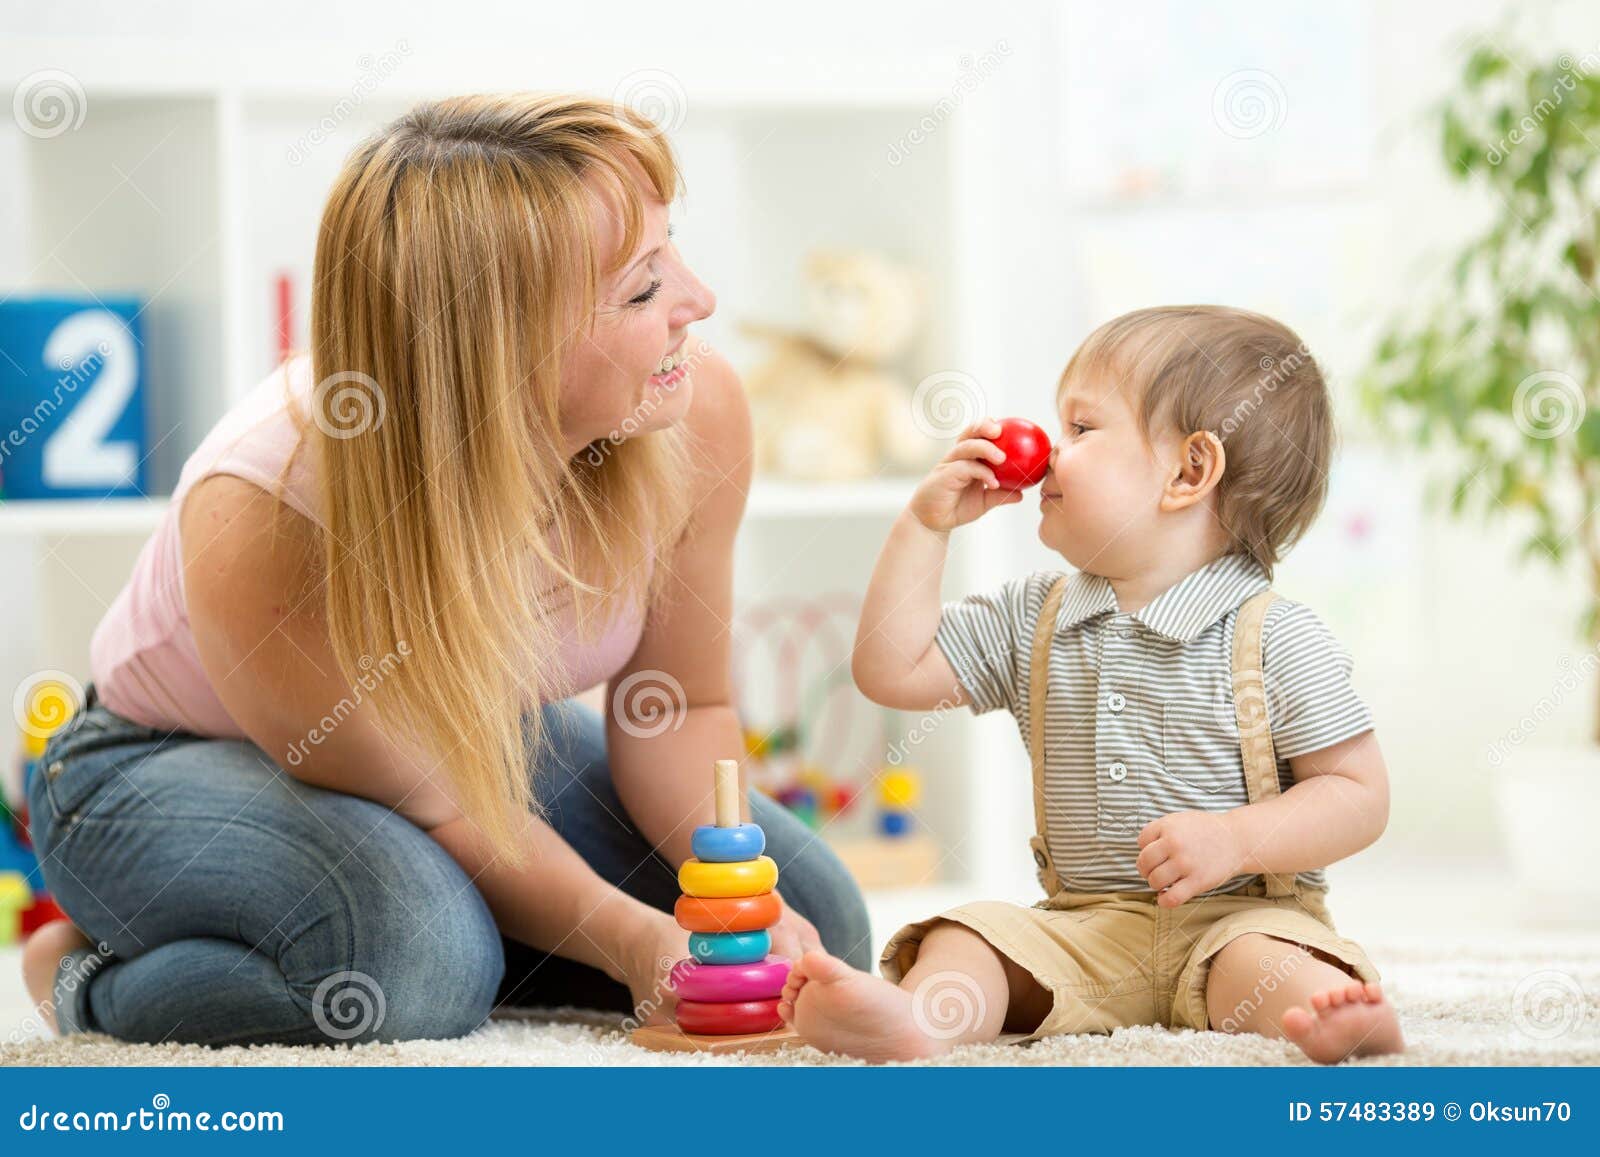 mother with child son play having fun pastime